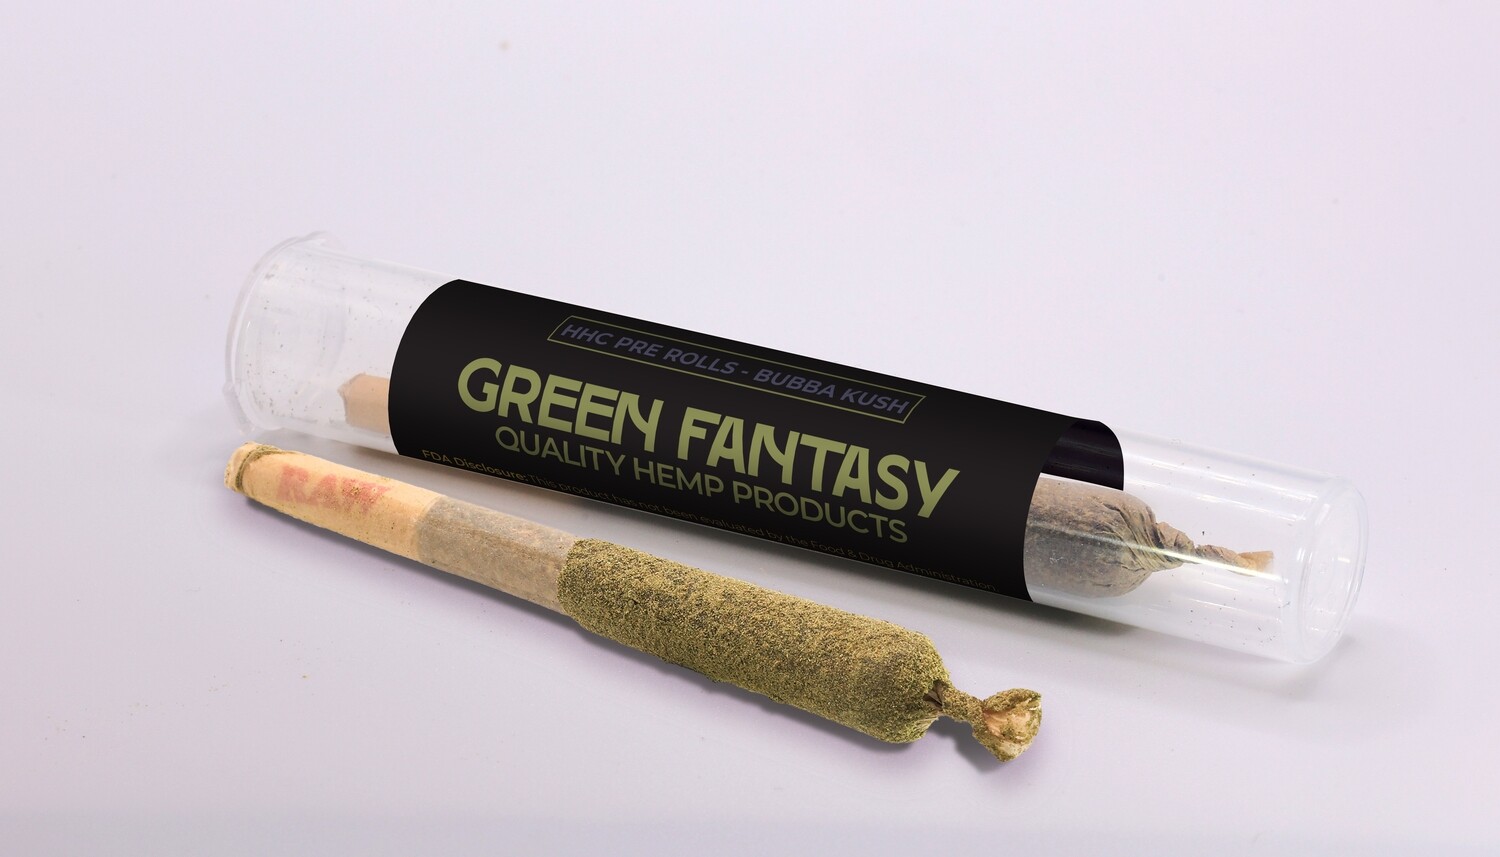 HHC Pre-Rolls Bubba Kush
- From 2 PIECES